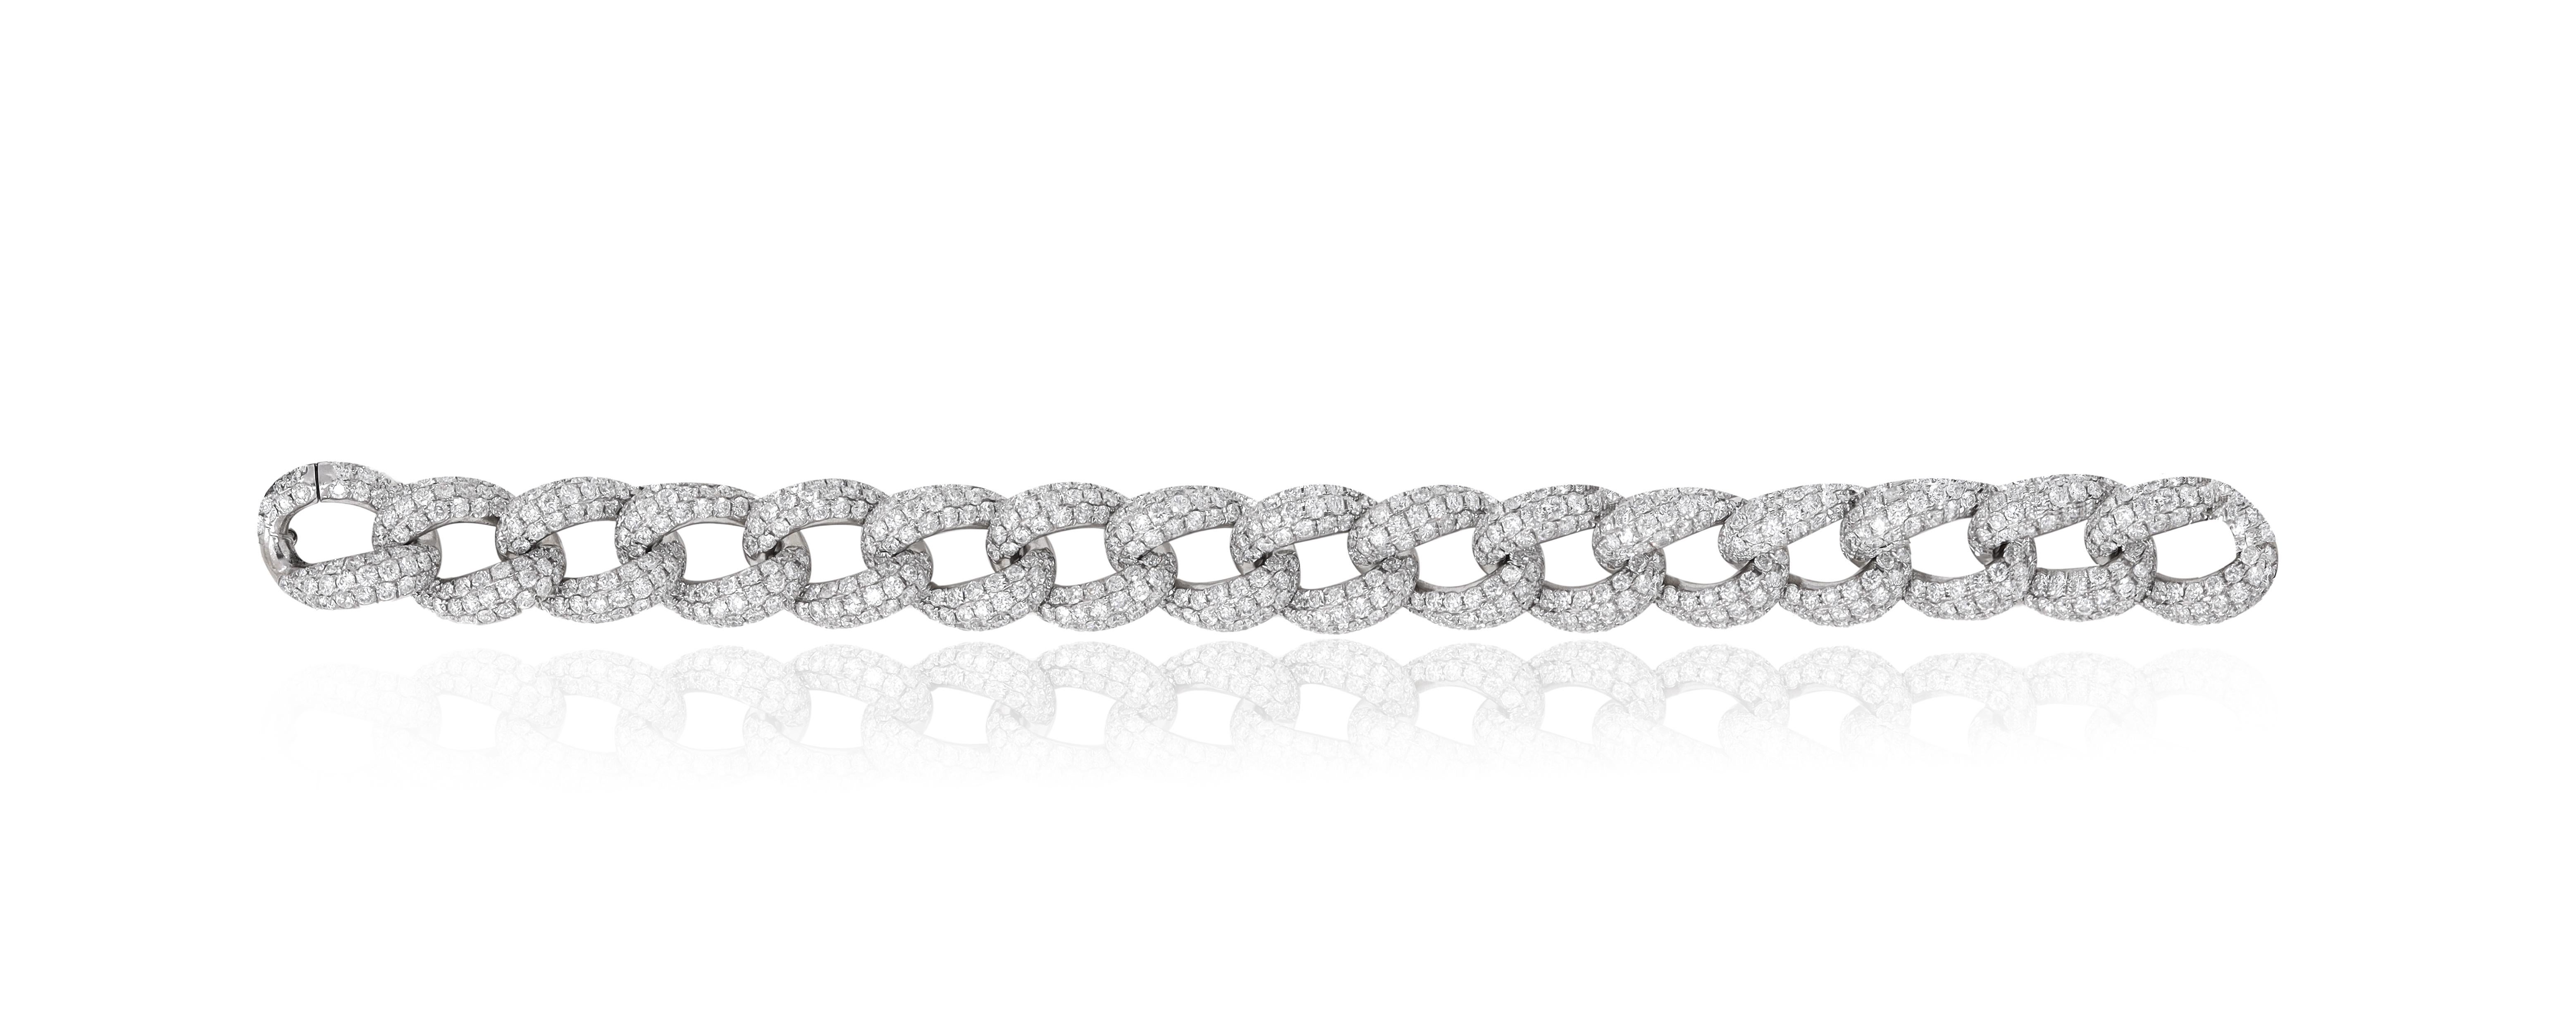 18kt white gold pave linked bracelet containing 18.78 cts of round diamonds
Diana M is one-stop shop for all your jewelry shopping, carrying line of diamond rings, earrings, bracelets, necklaces, and other fine jewelry.
We create our jewelry from